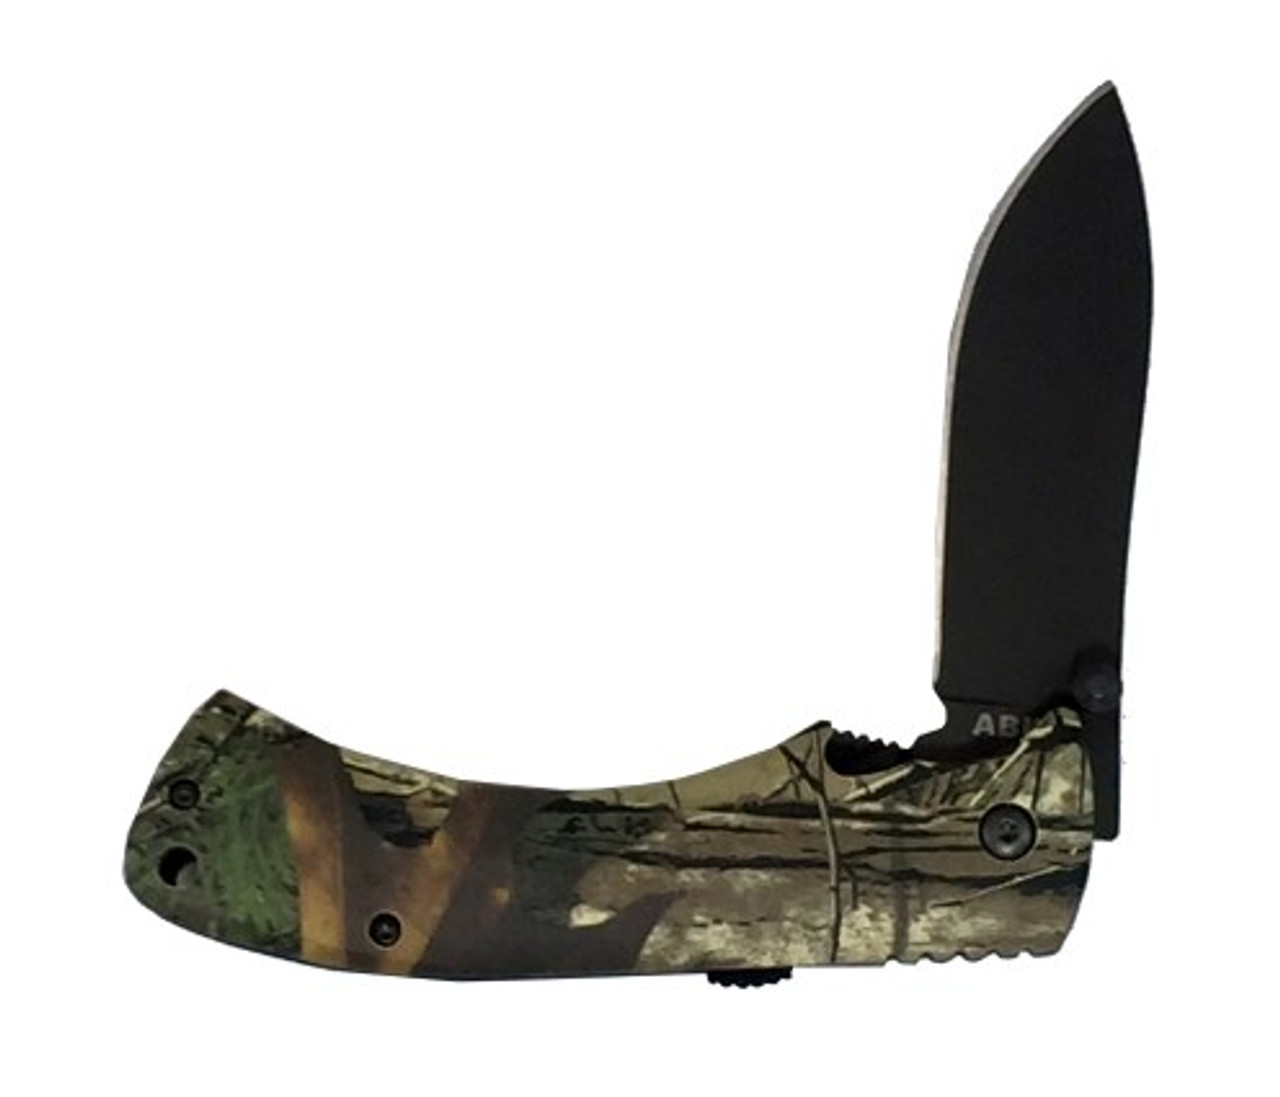 EXTRA ASST OPEN REALTREE CAMO SAFETY LOCK